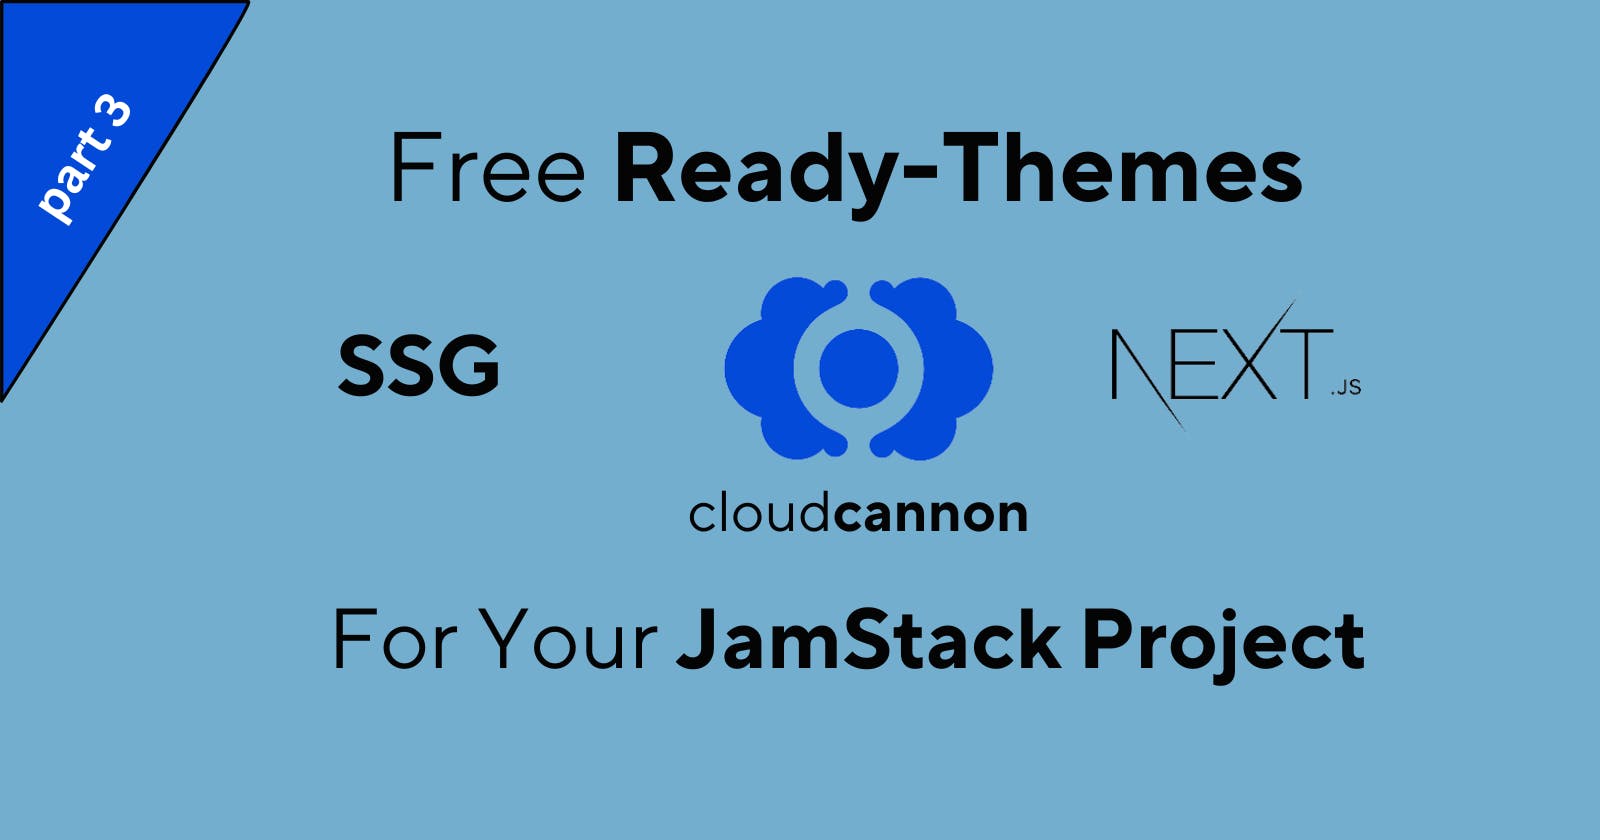 A Step-by-Step Guide to Installing Pre-Configured Cloudcannon Themes for Your Jamstack Project